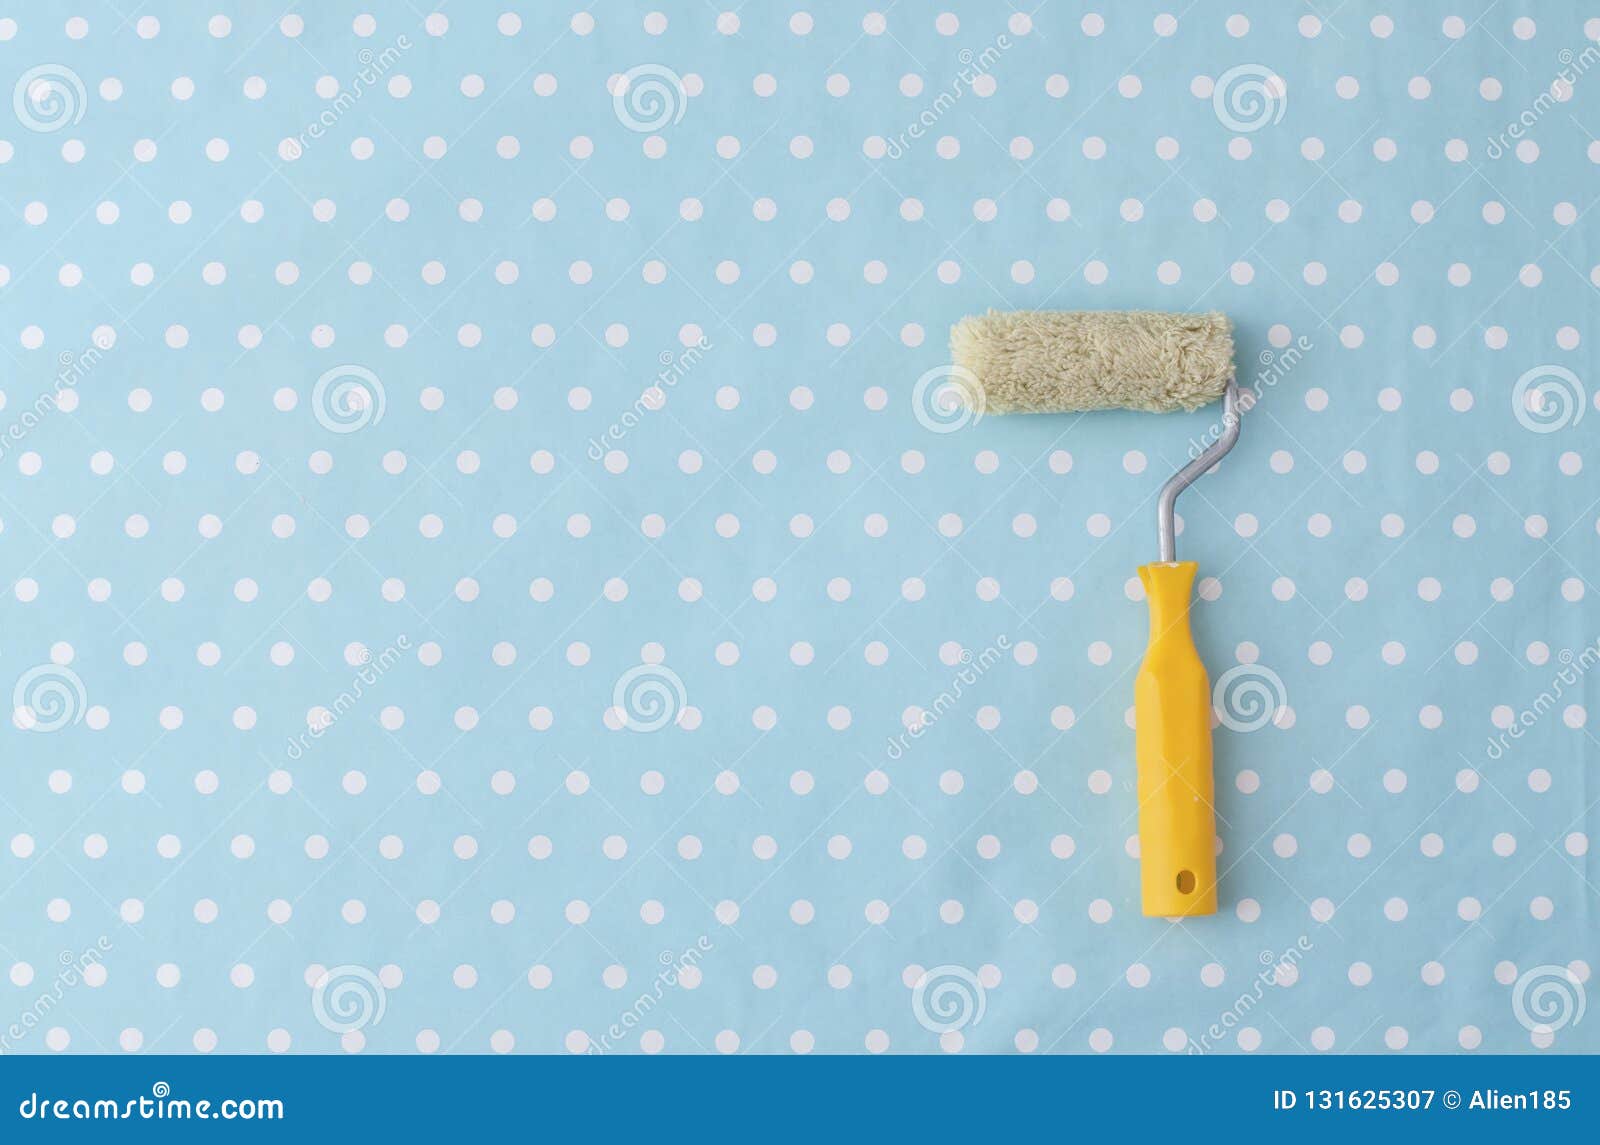 Yellow Paint Roller Over Blue Polka Dot Wallpaper Stock Image - Image of  wall, roll: 131625307